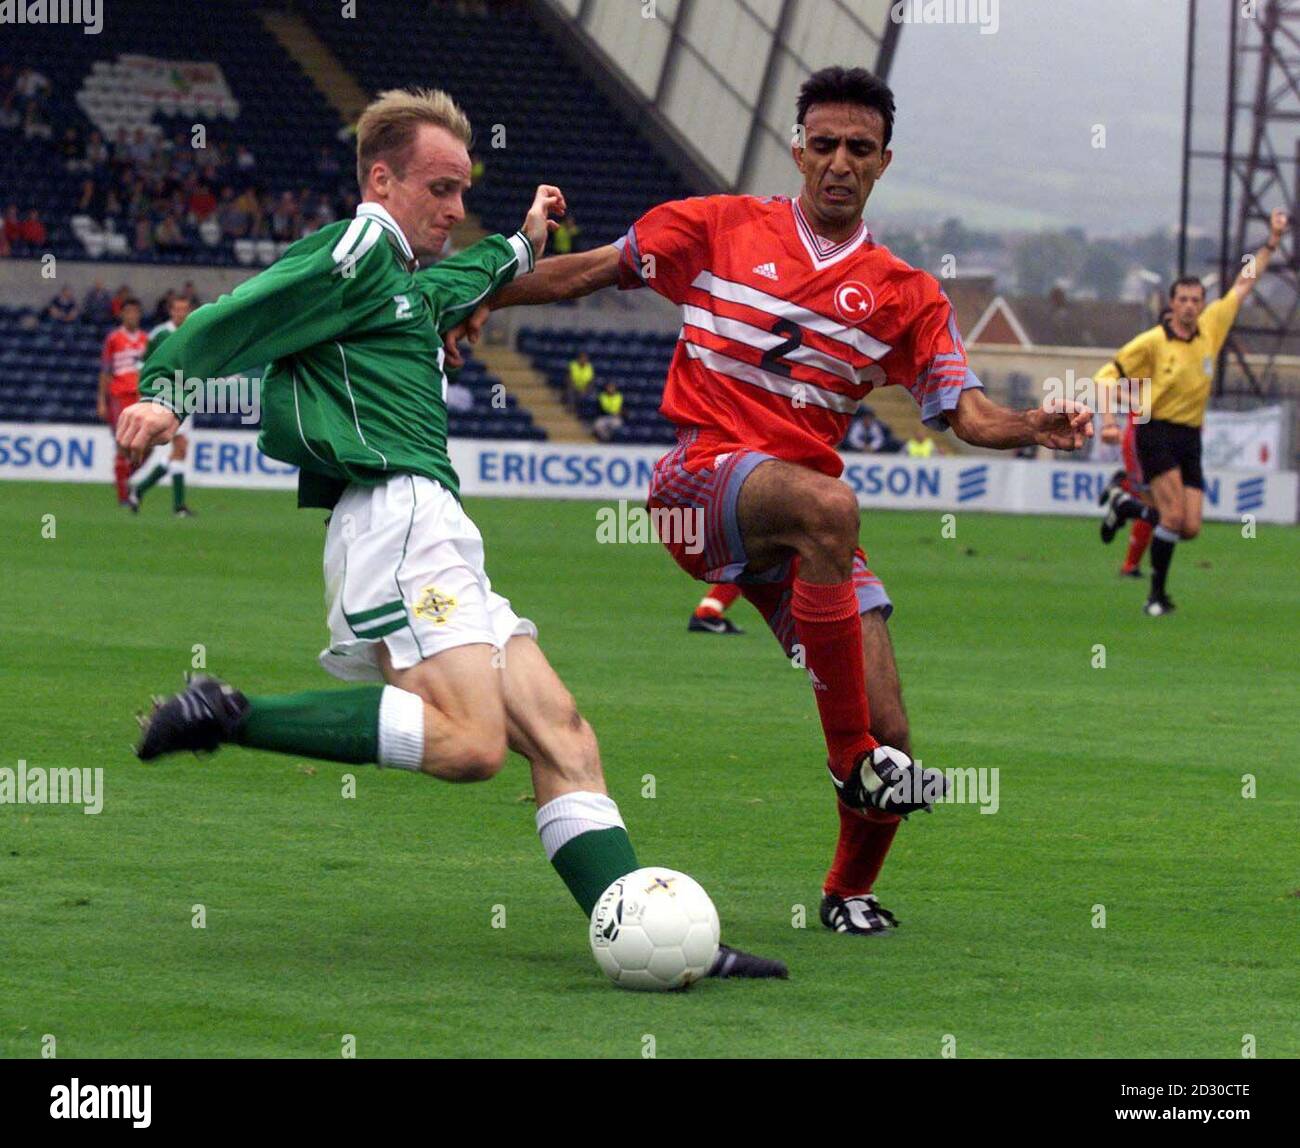 Nothern Ireland's John Mc Carthy (left) beats  Turkey's Beserler to the ball in the Euro 2000 qualifier football match at Windsor Park in Belfast. Stock Photo